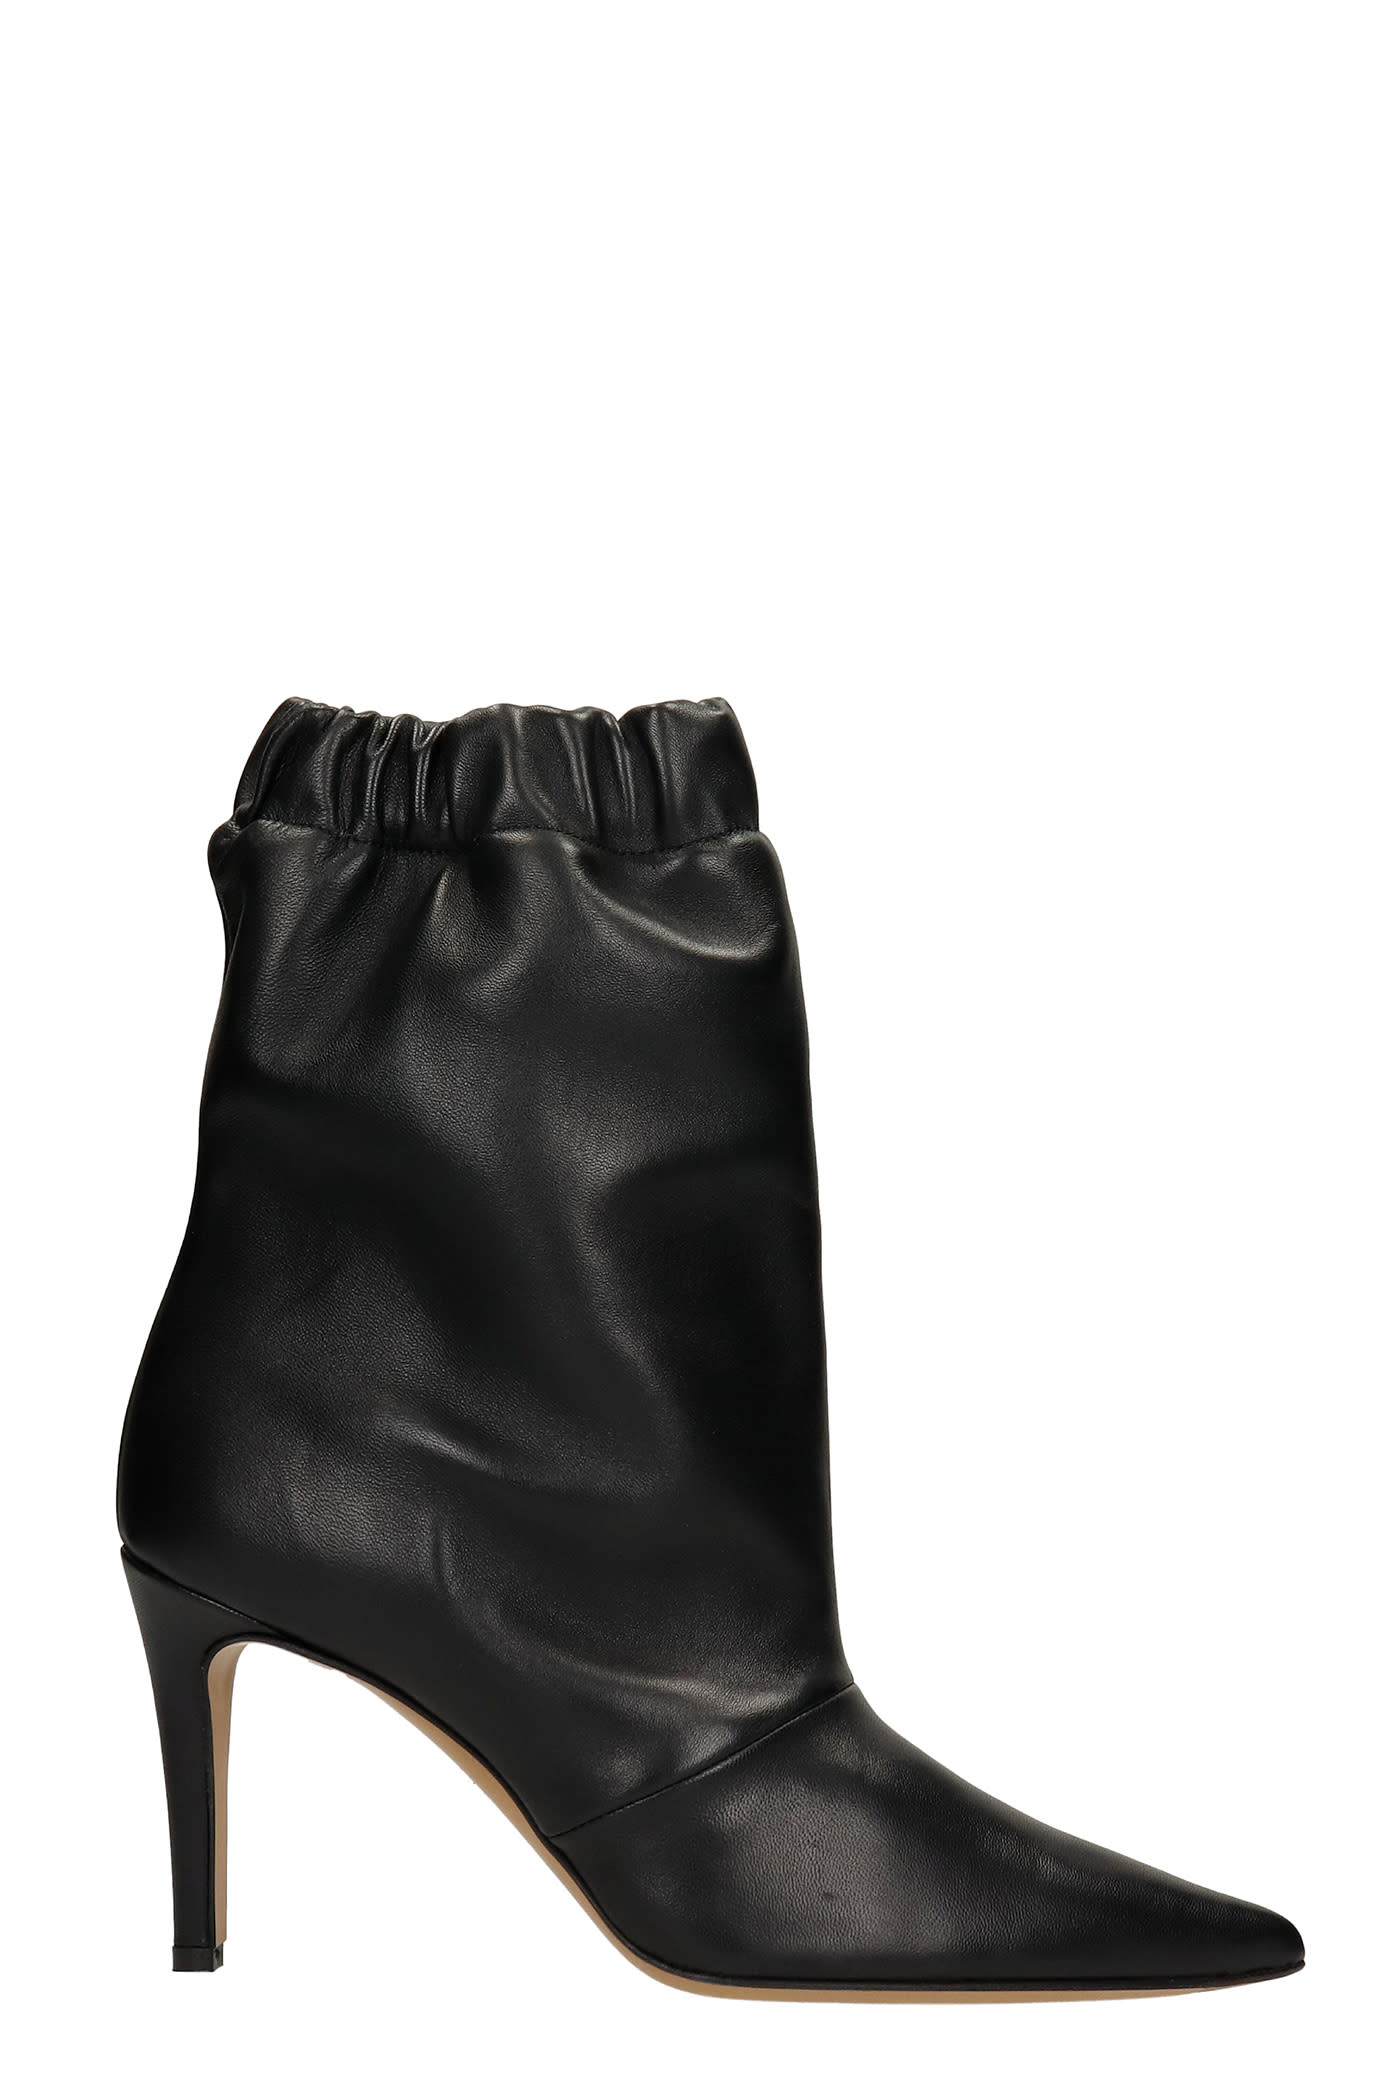 Marc Ellis Lincon High Heels Ankle Boots In Black Leather